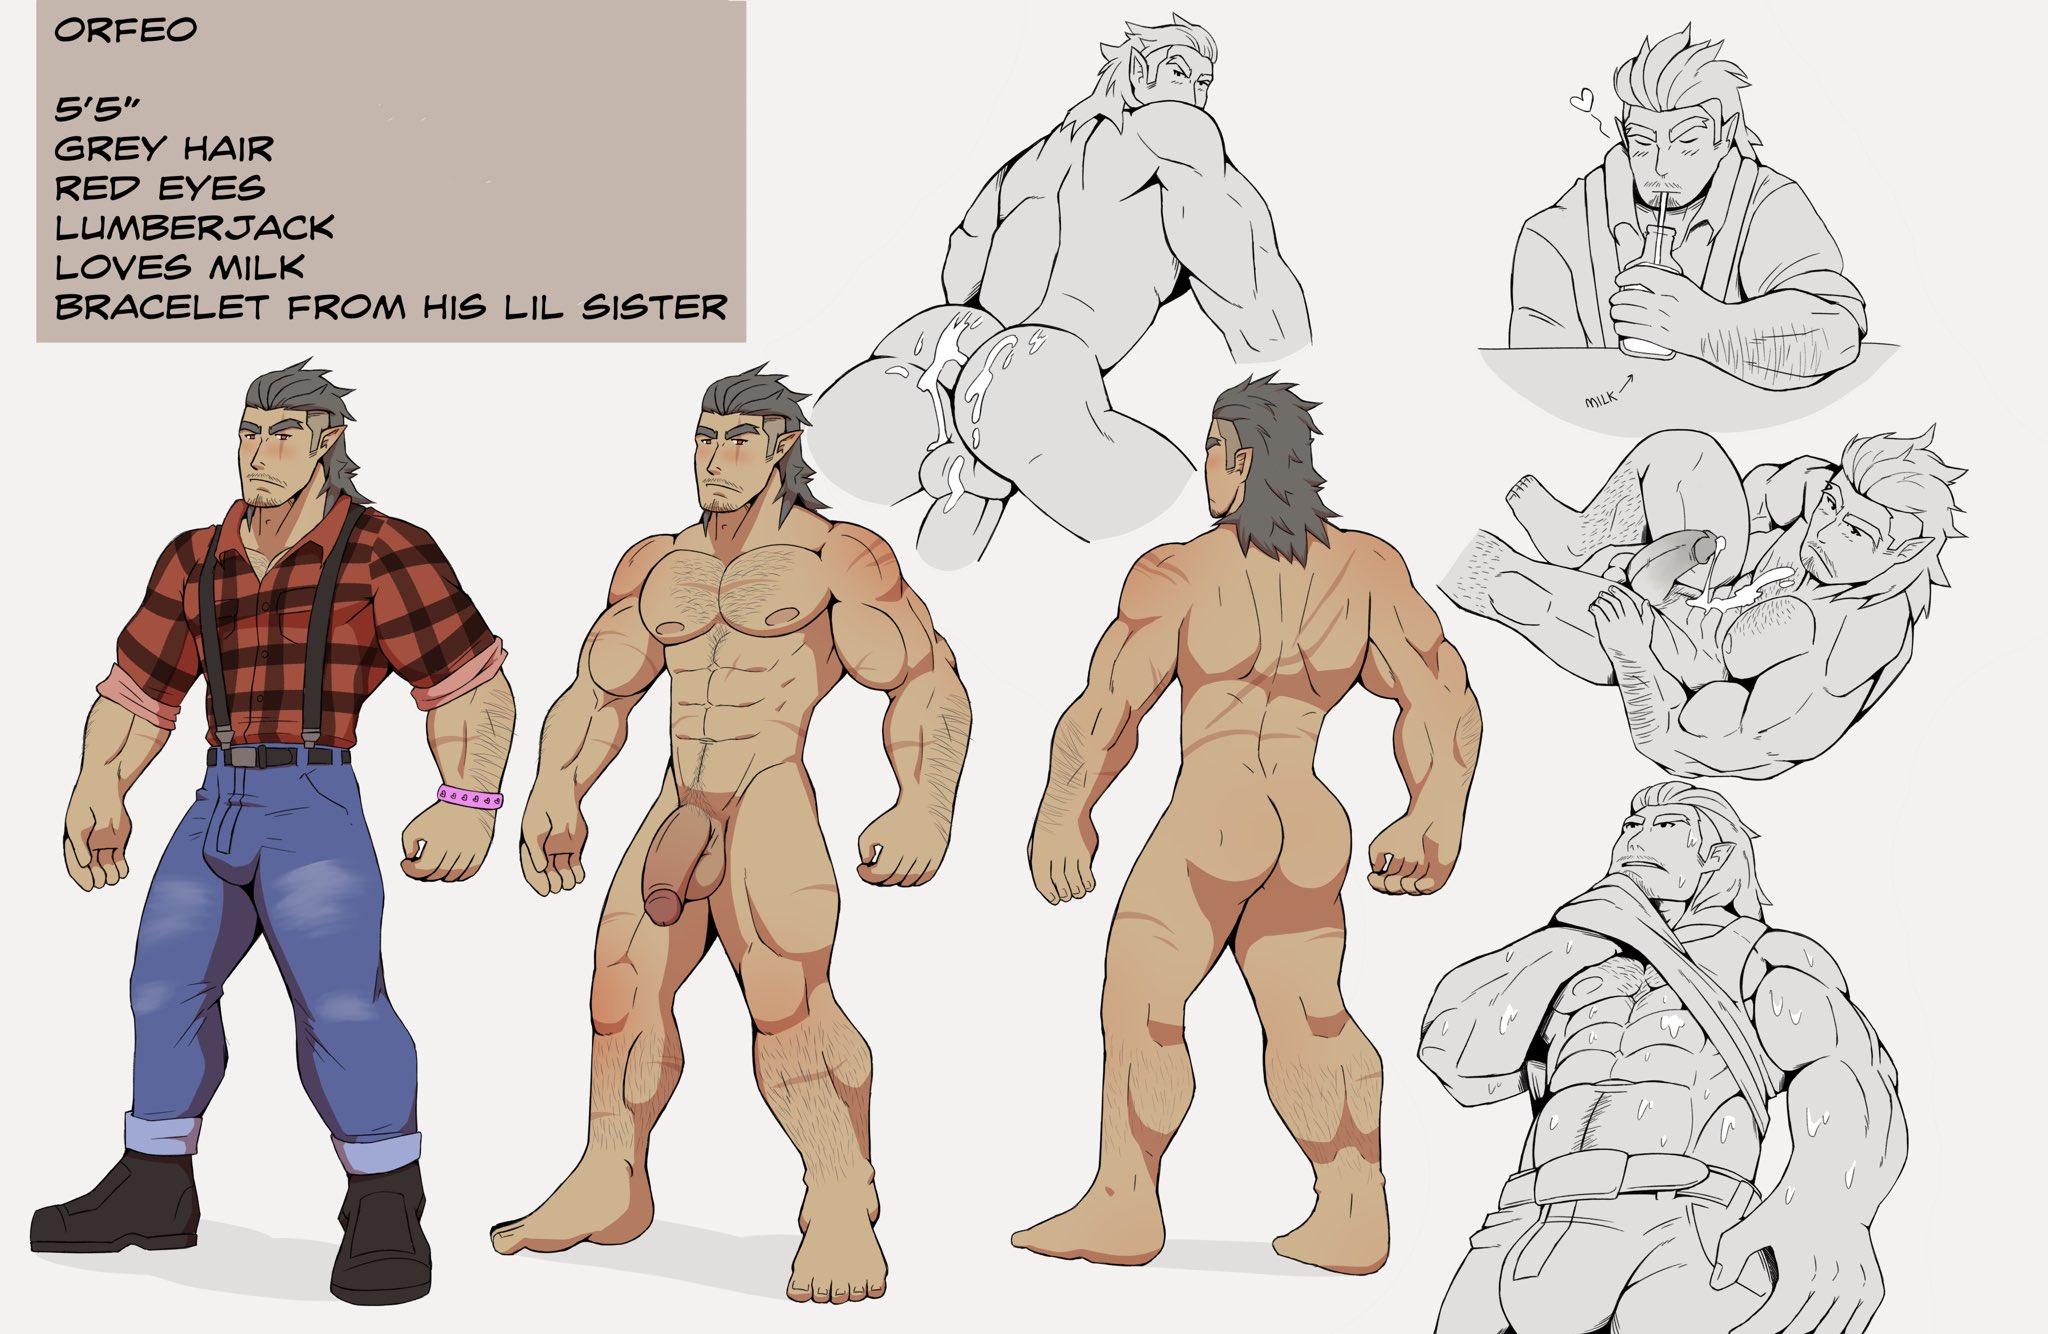 “here’s Orfeo! the lumberjack from the himbo challenge!
